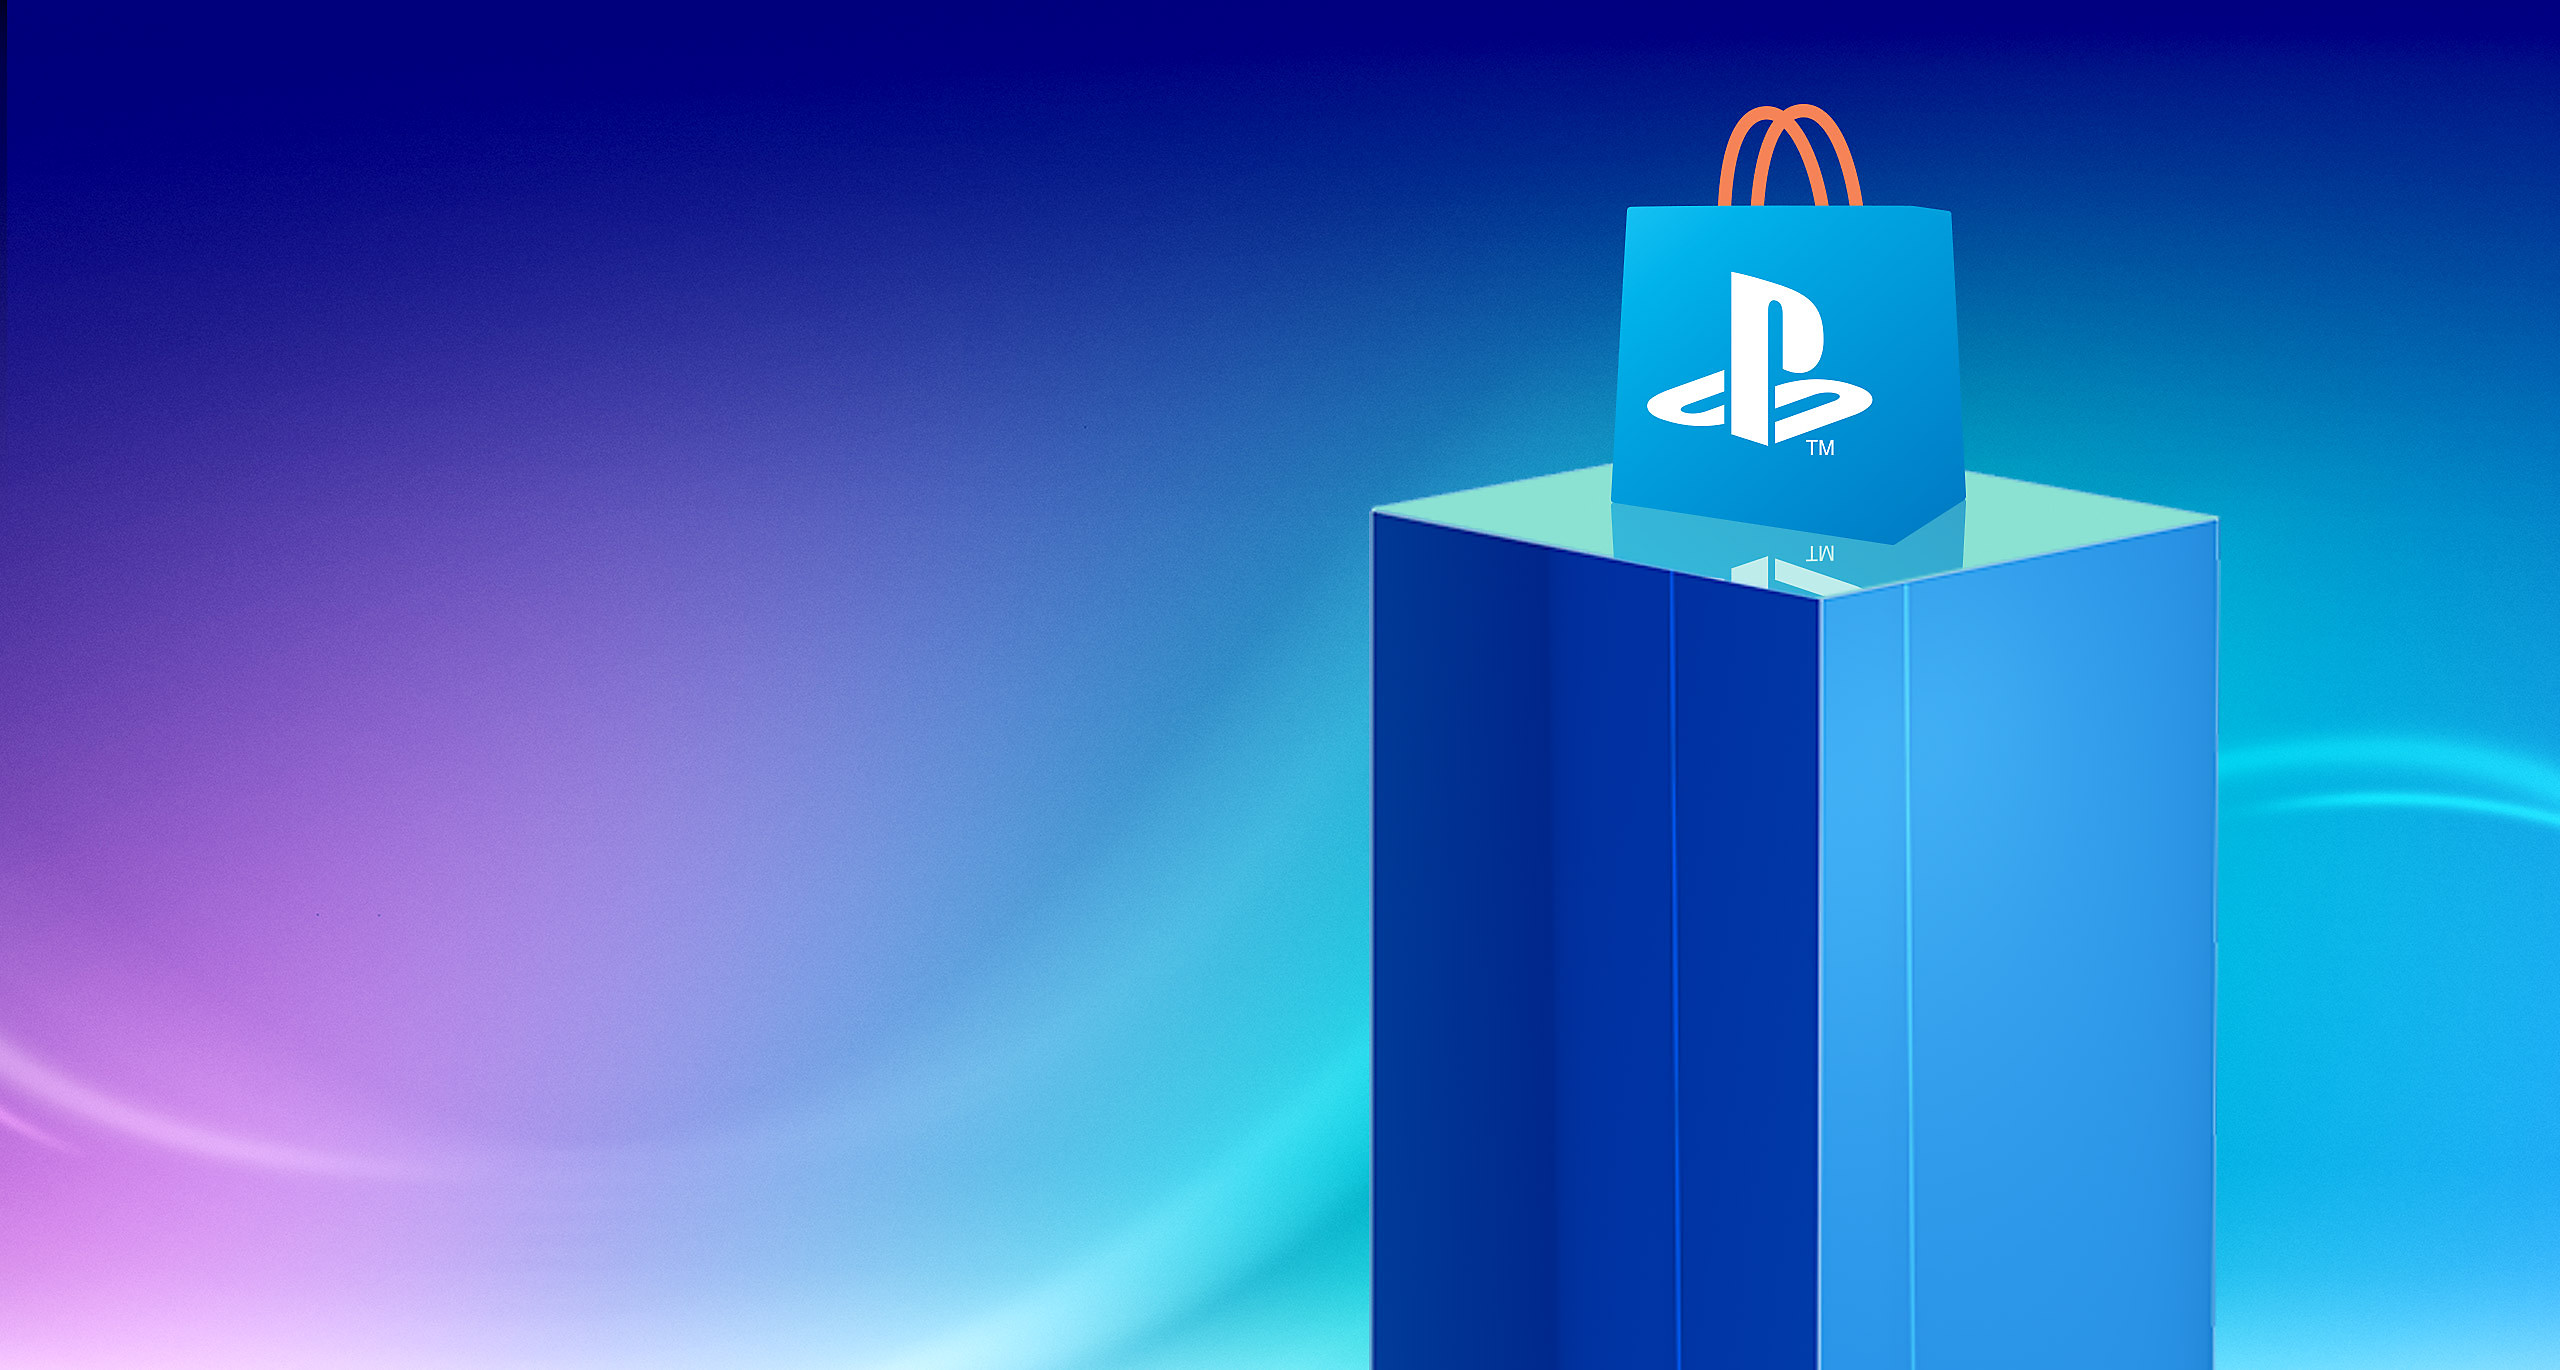 Ps4 store турция. PLAYSTATION Store. PS Store лого. Магазин PLAYSTATION. PS Store PNG.